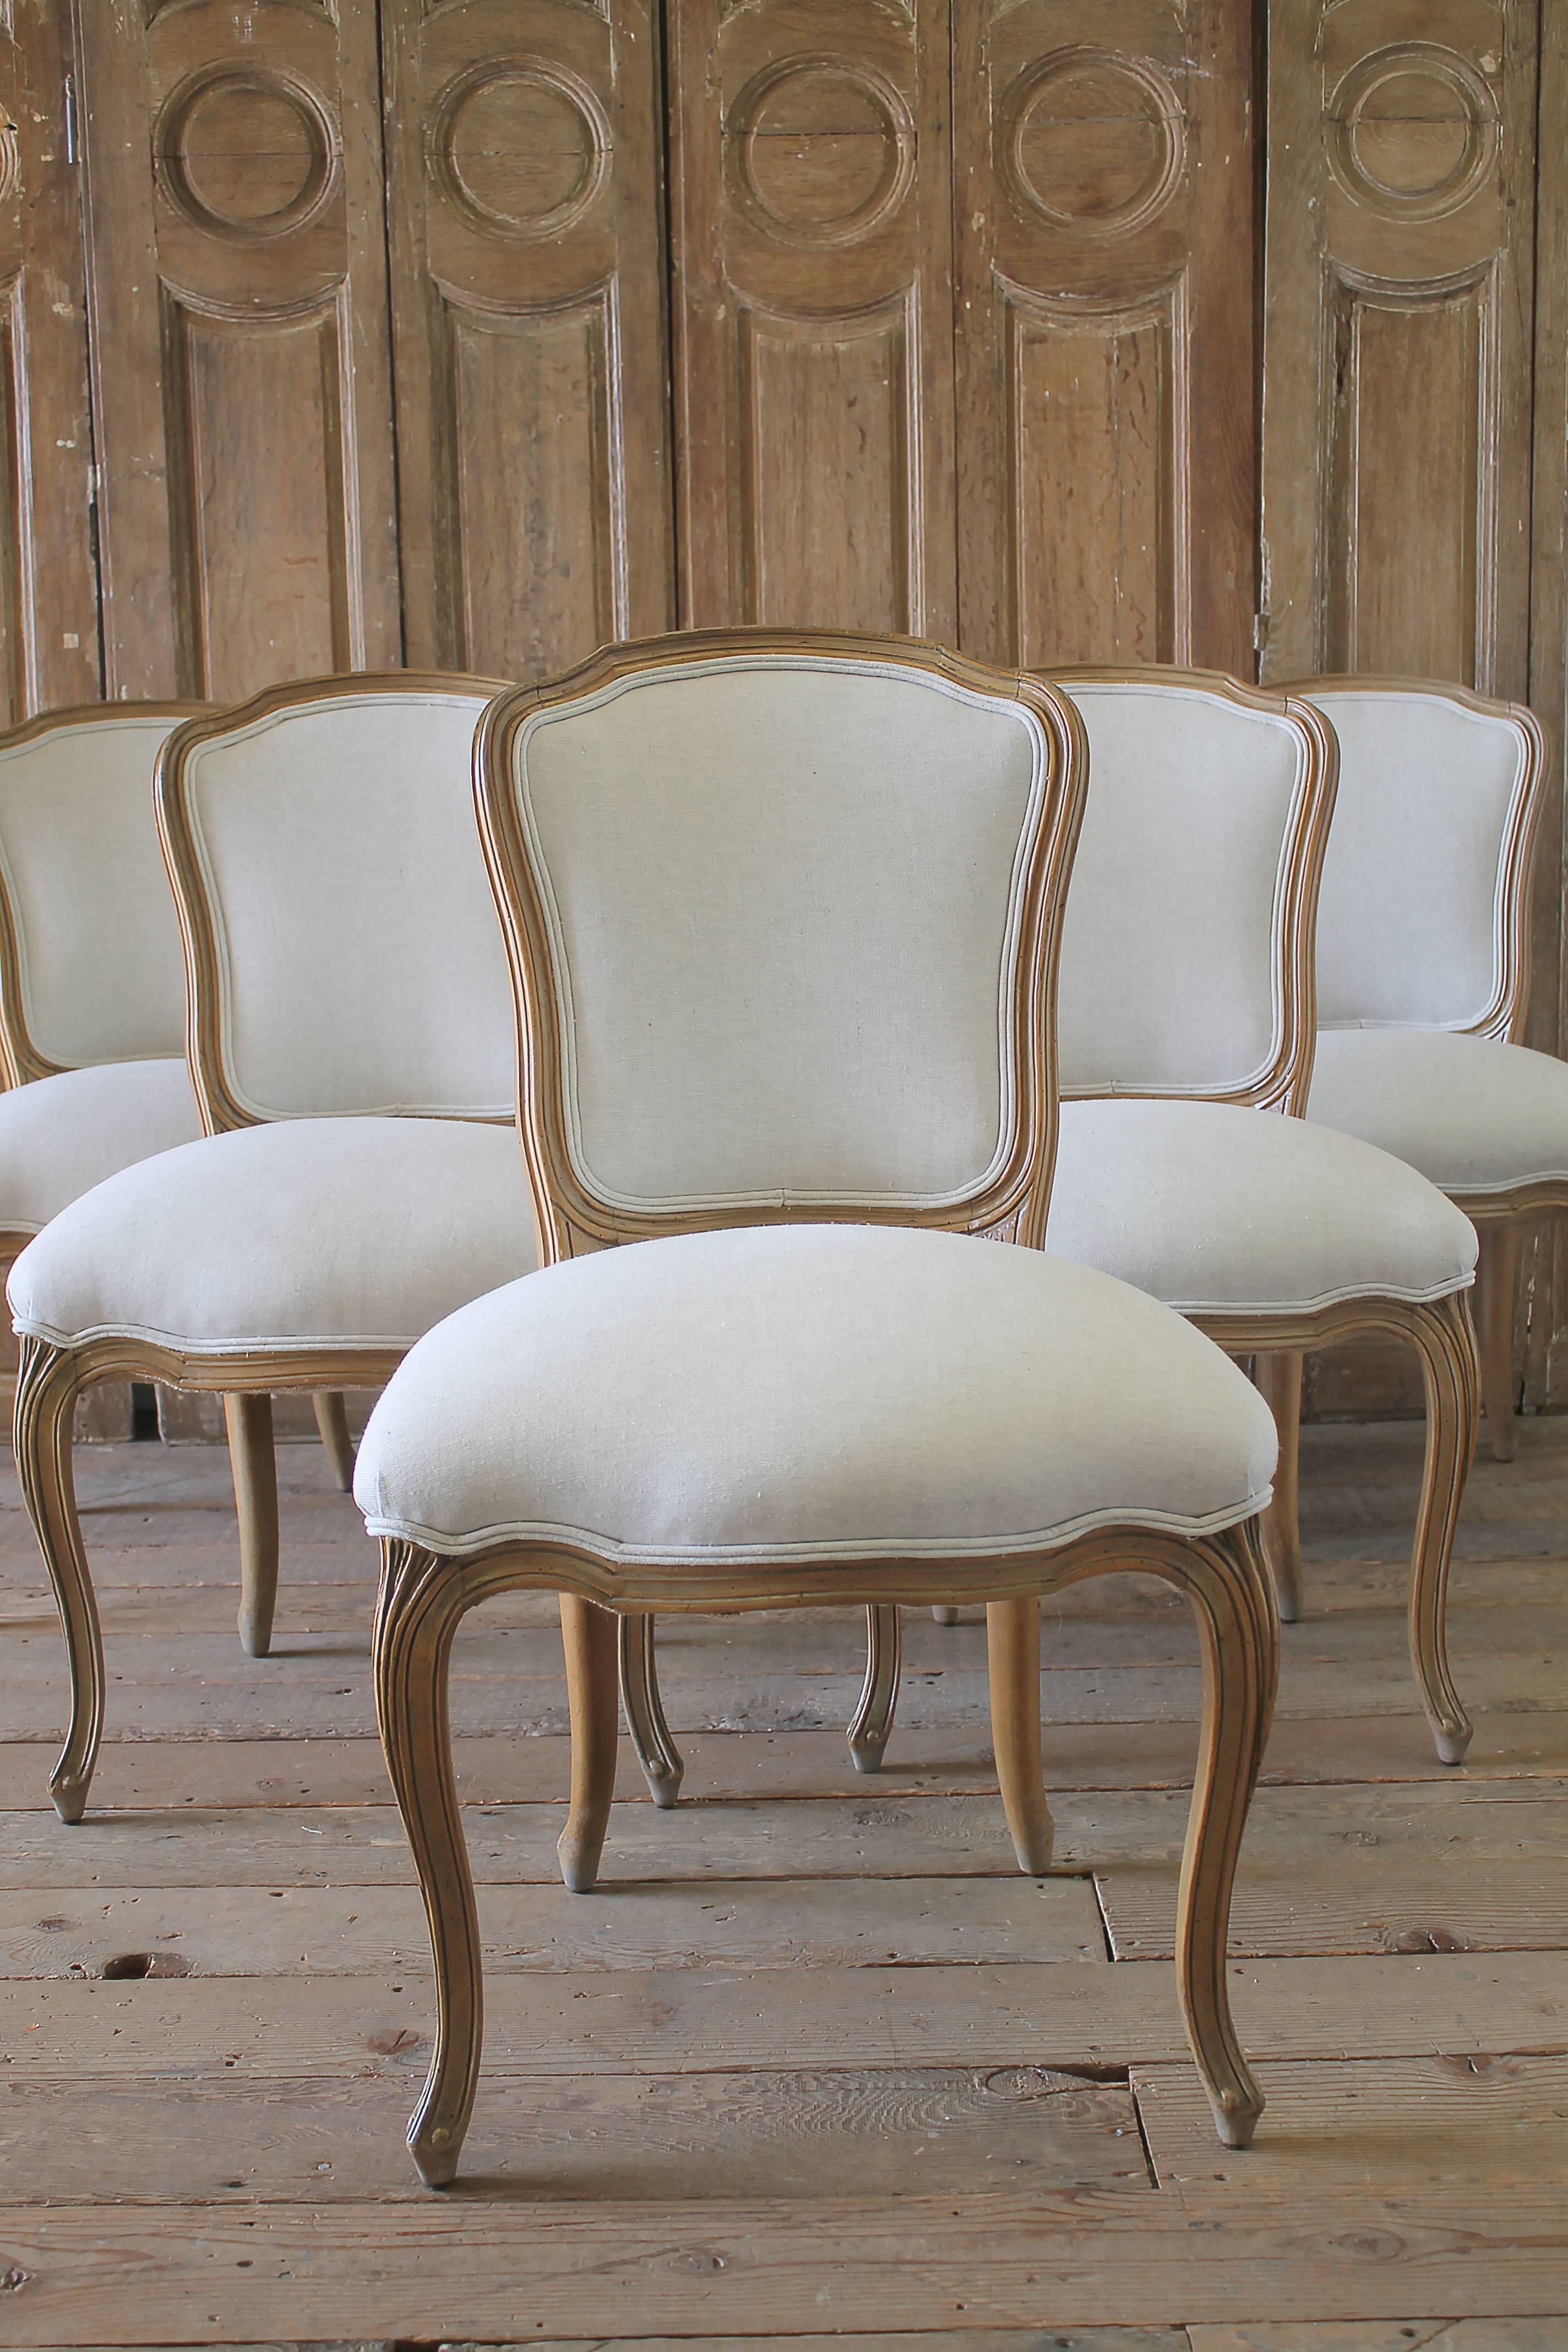 20th century set of six wood Louis XV style dining chairs in natural Belgian linen
Frames have newly retied spring seats, and brand new linen upholstery in our soft natural. During reupholstery each chair was made sure to be solid and sturdy, the